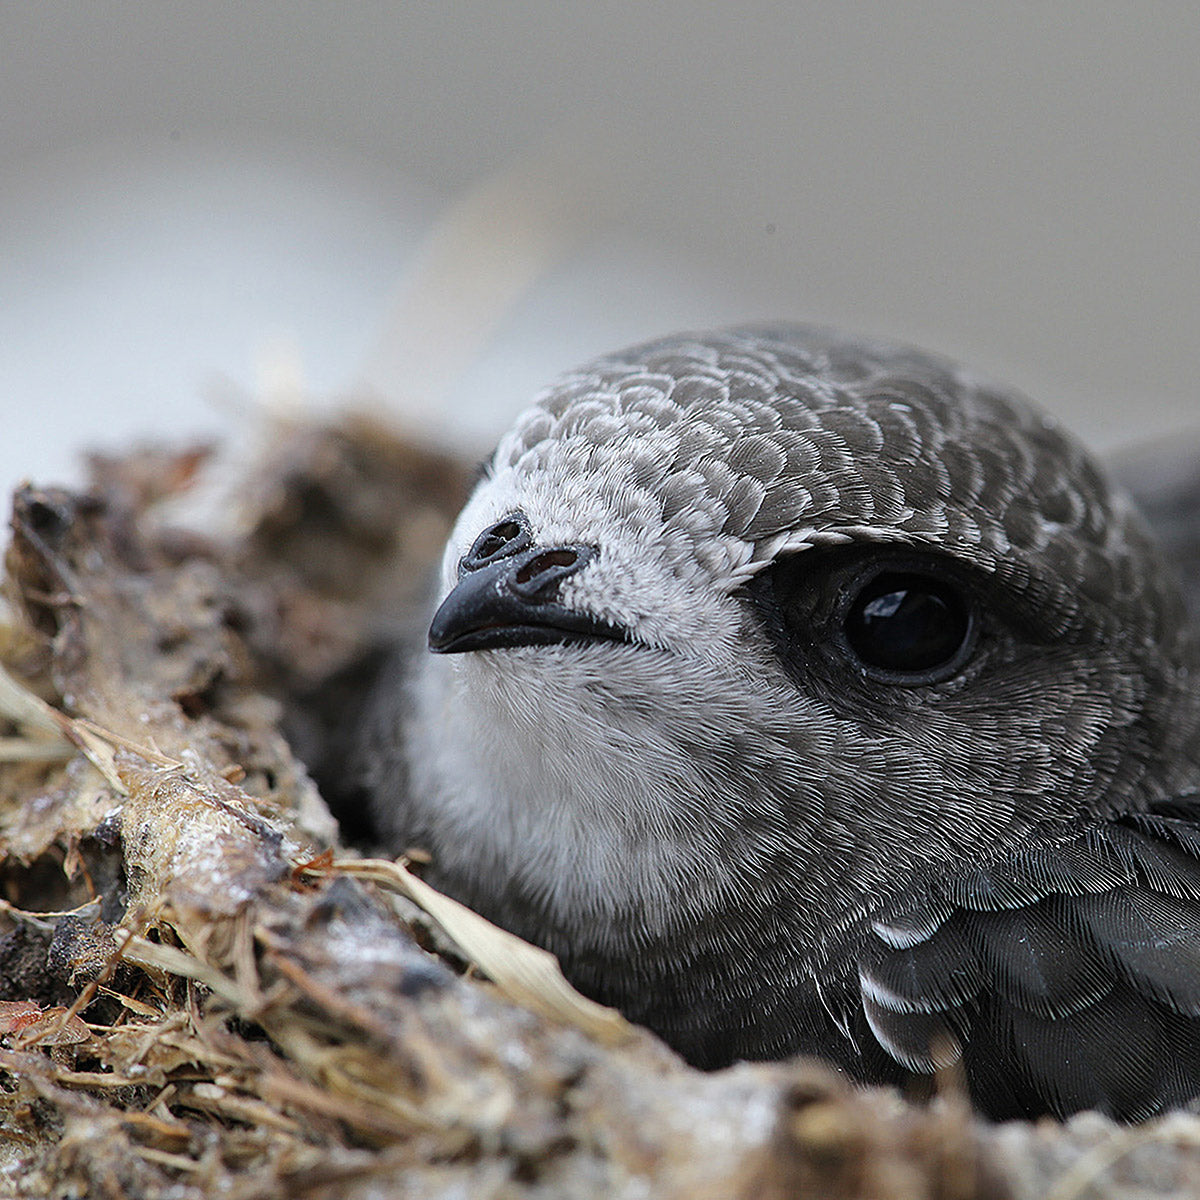 swift shown in nest from swift conservation trust